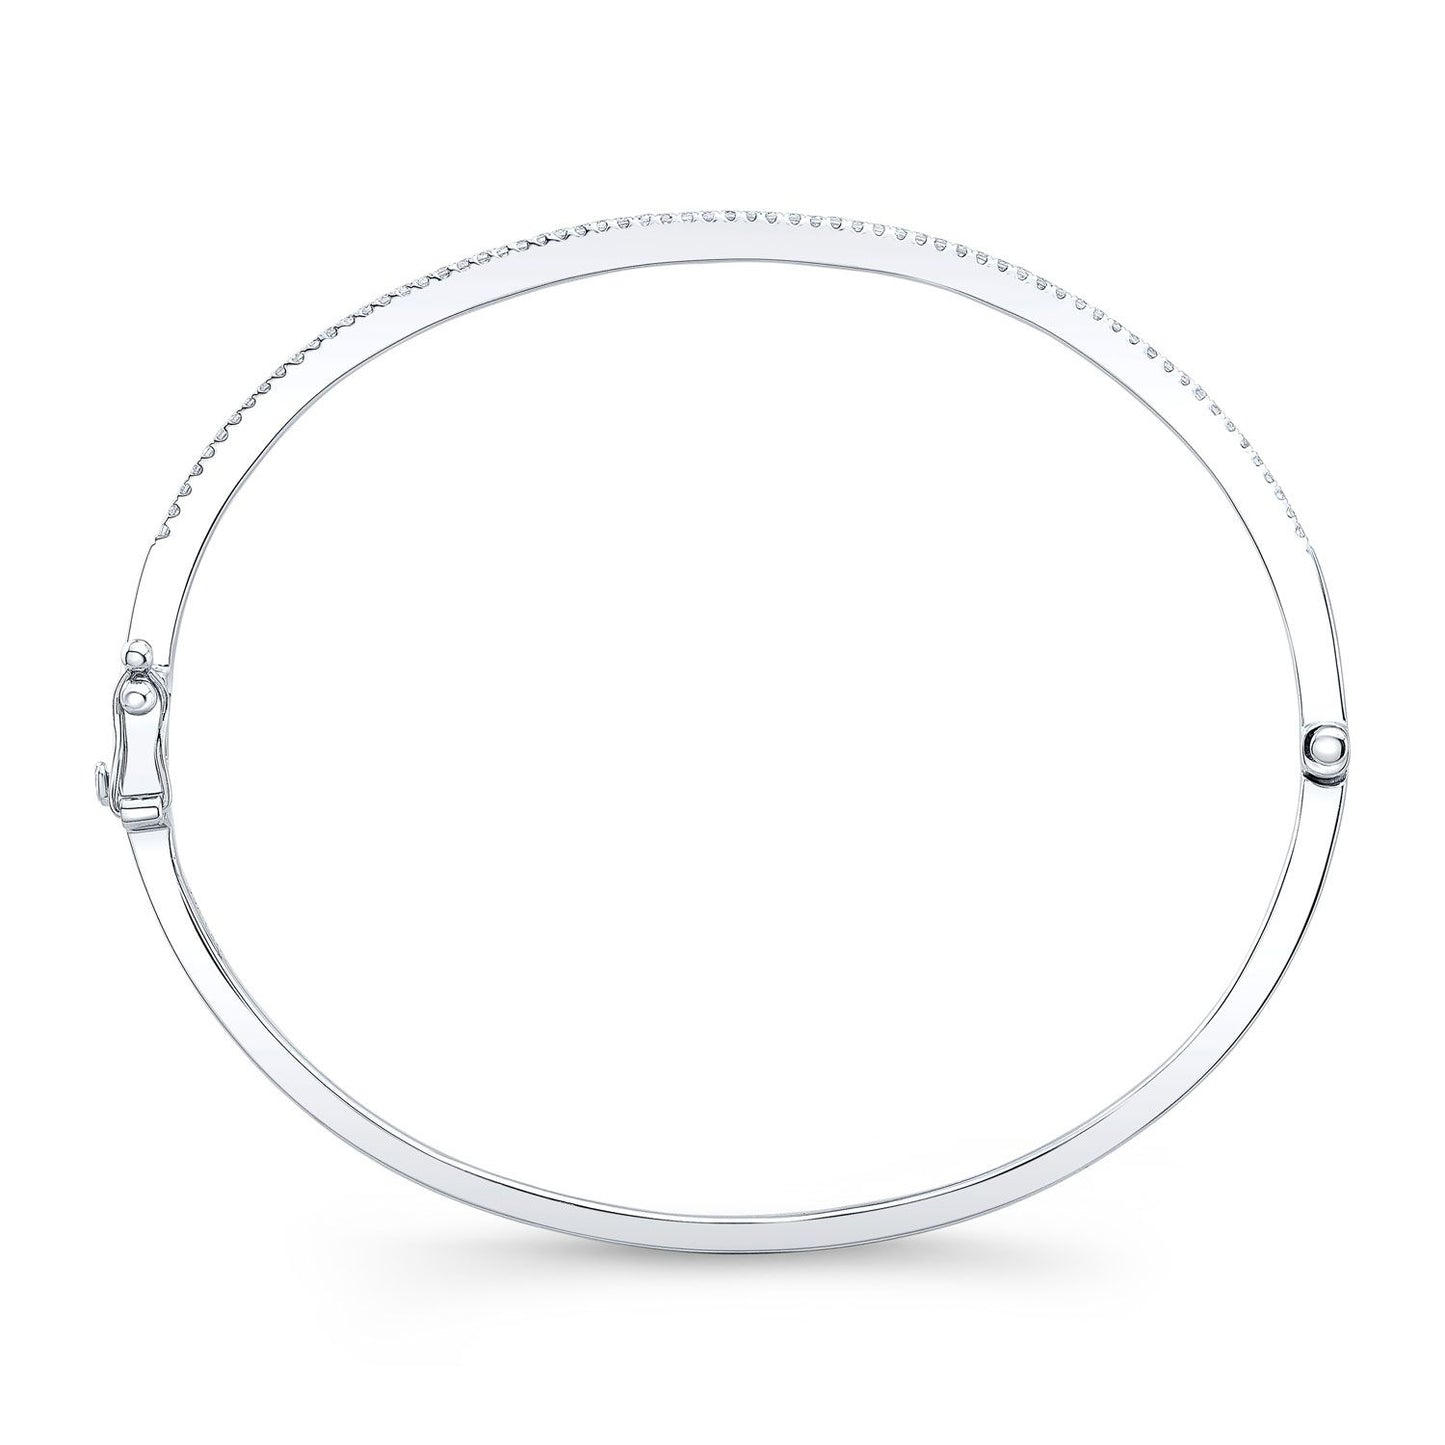 Pave Bangle In 14k White Gold